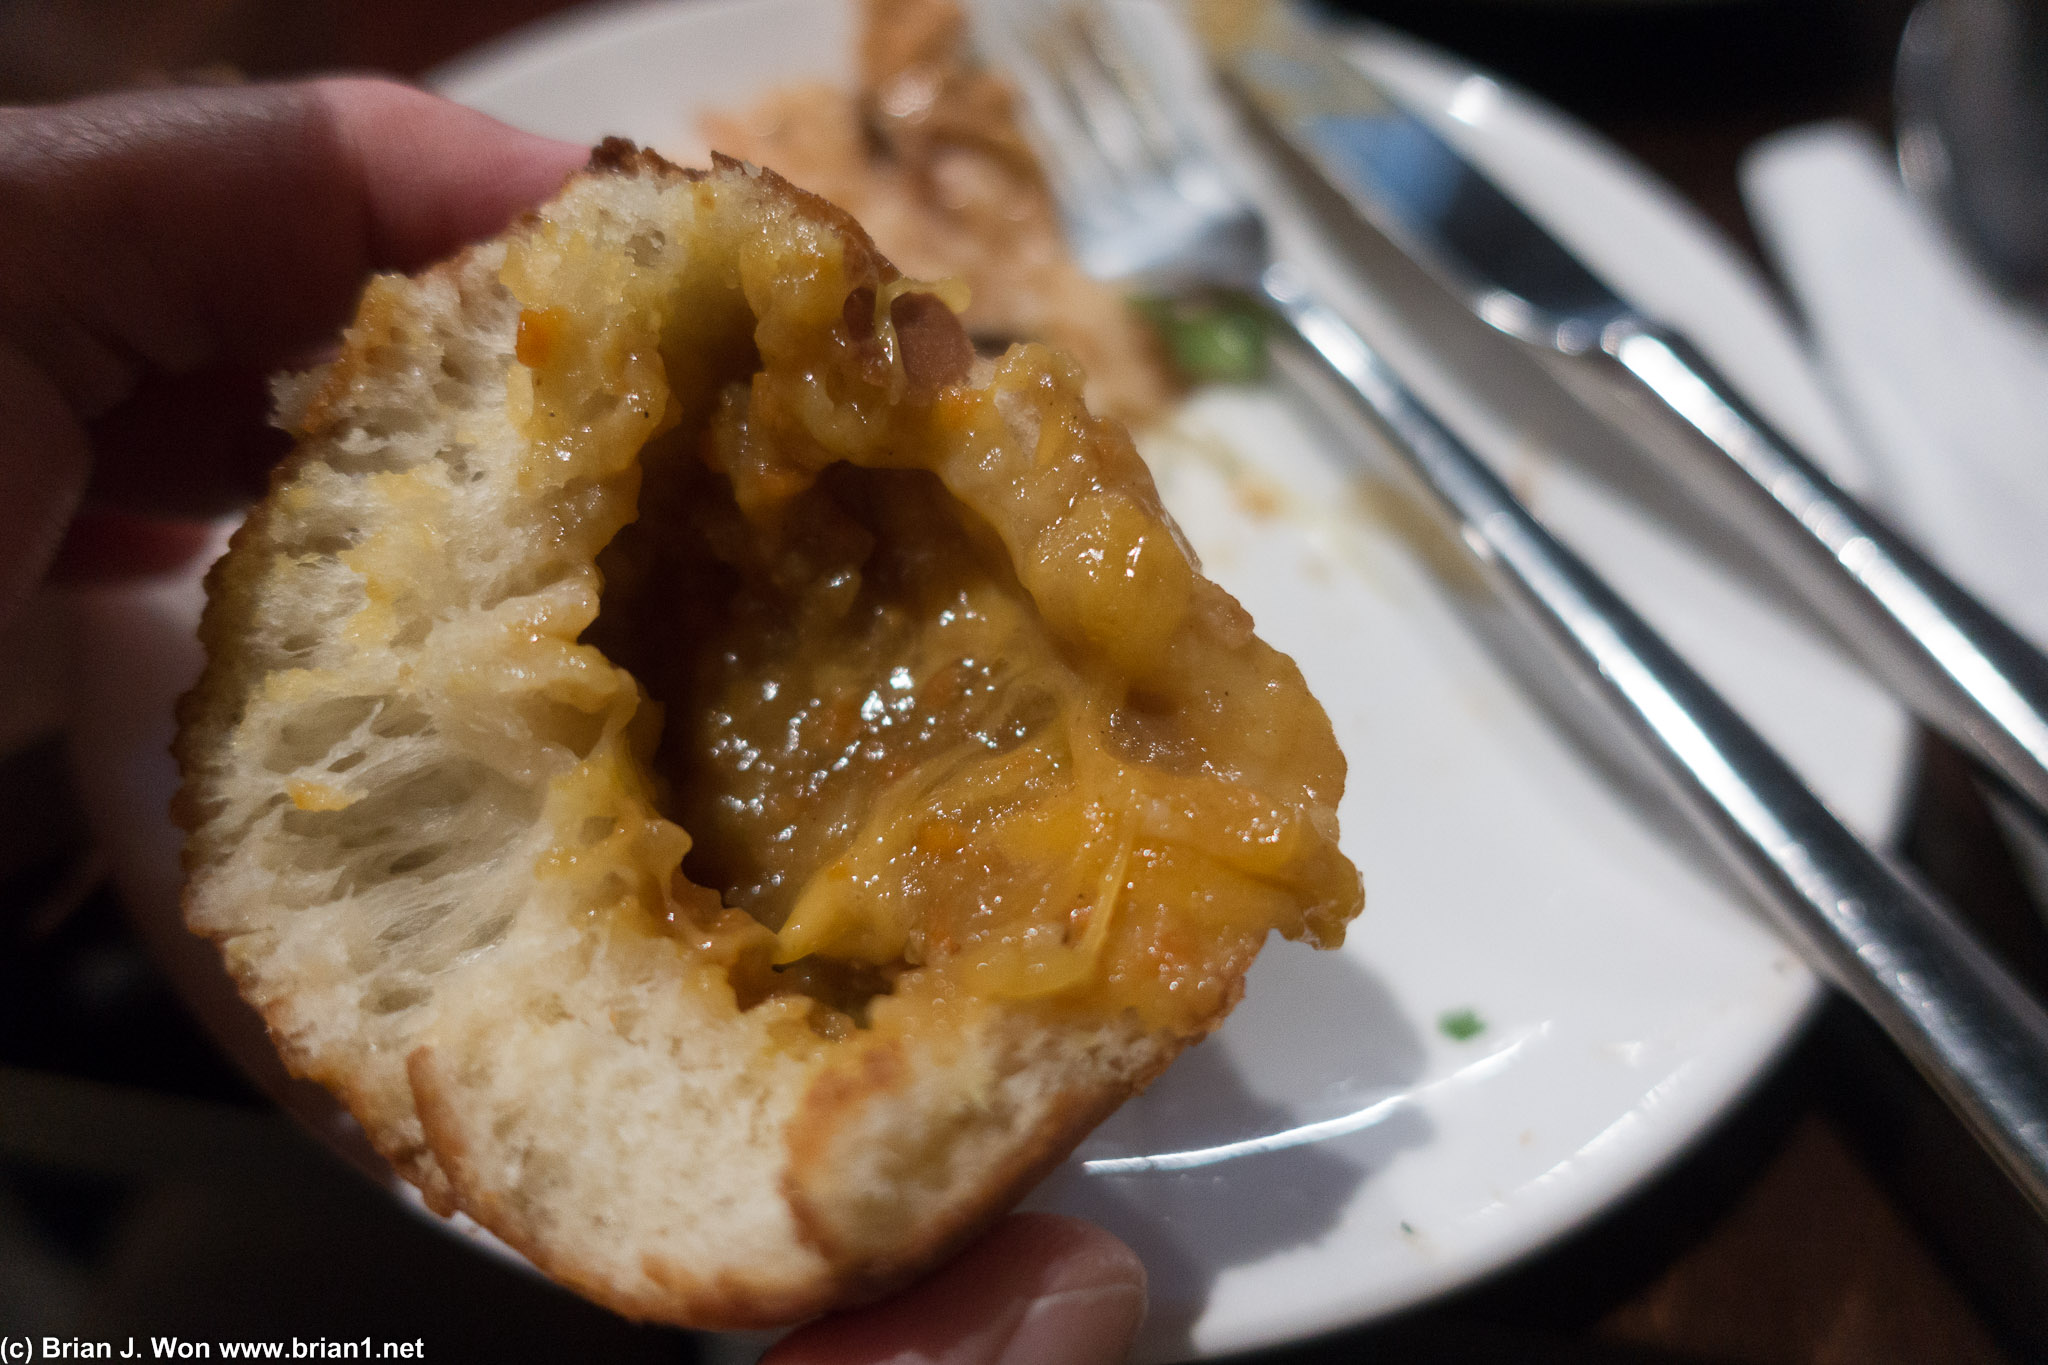 Curry cheese donut. Not a fan... pretty a more traditional curry pan done spicy.